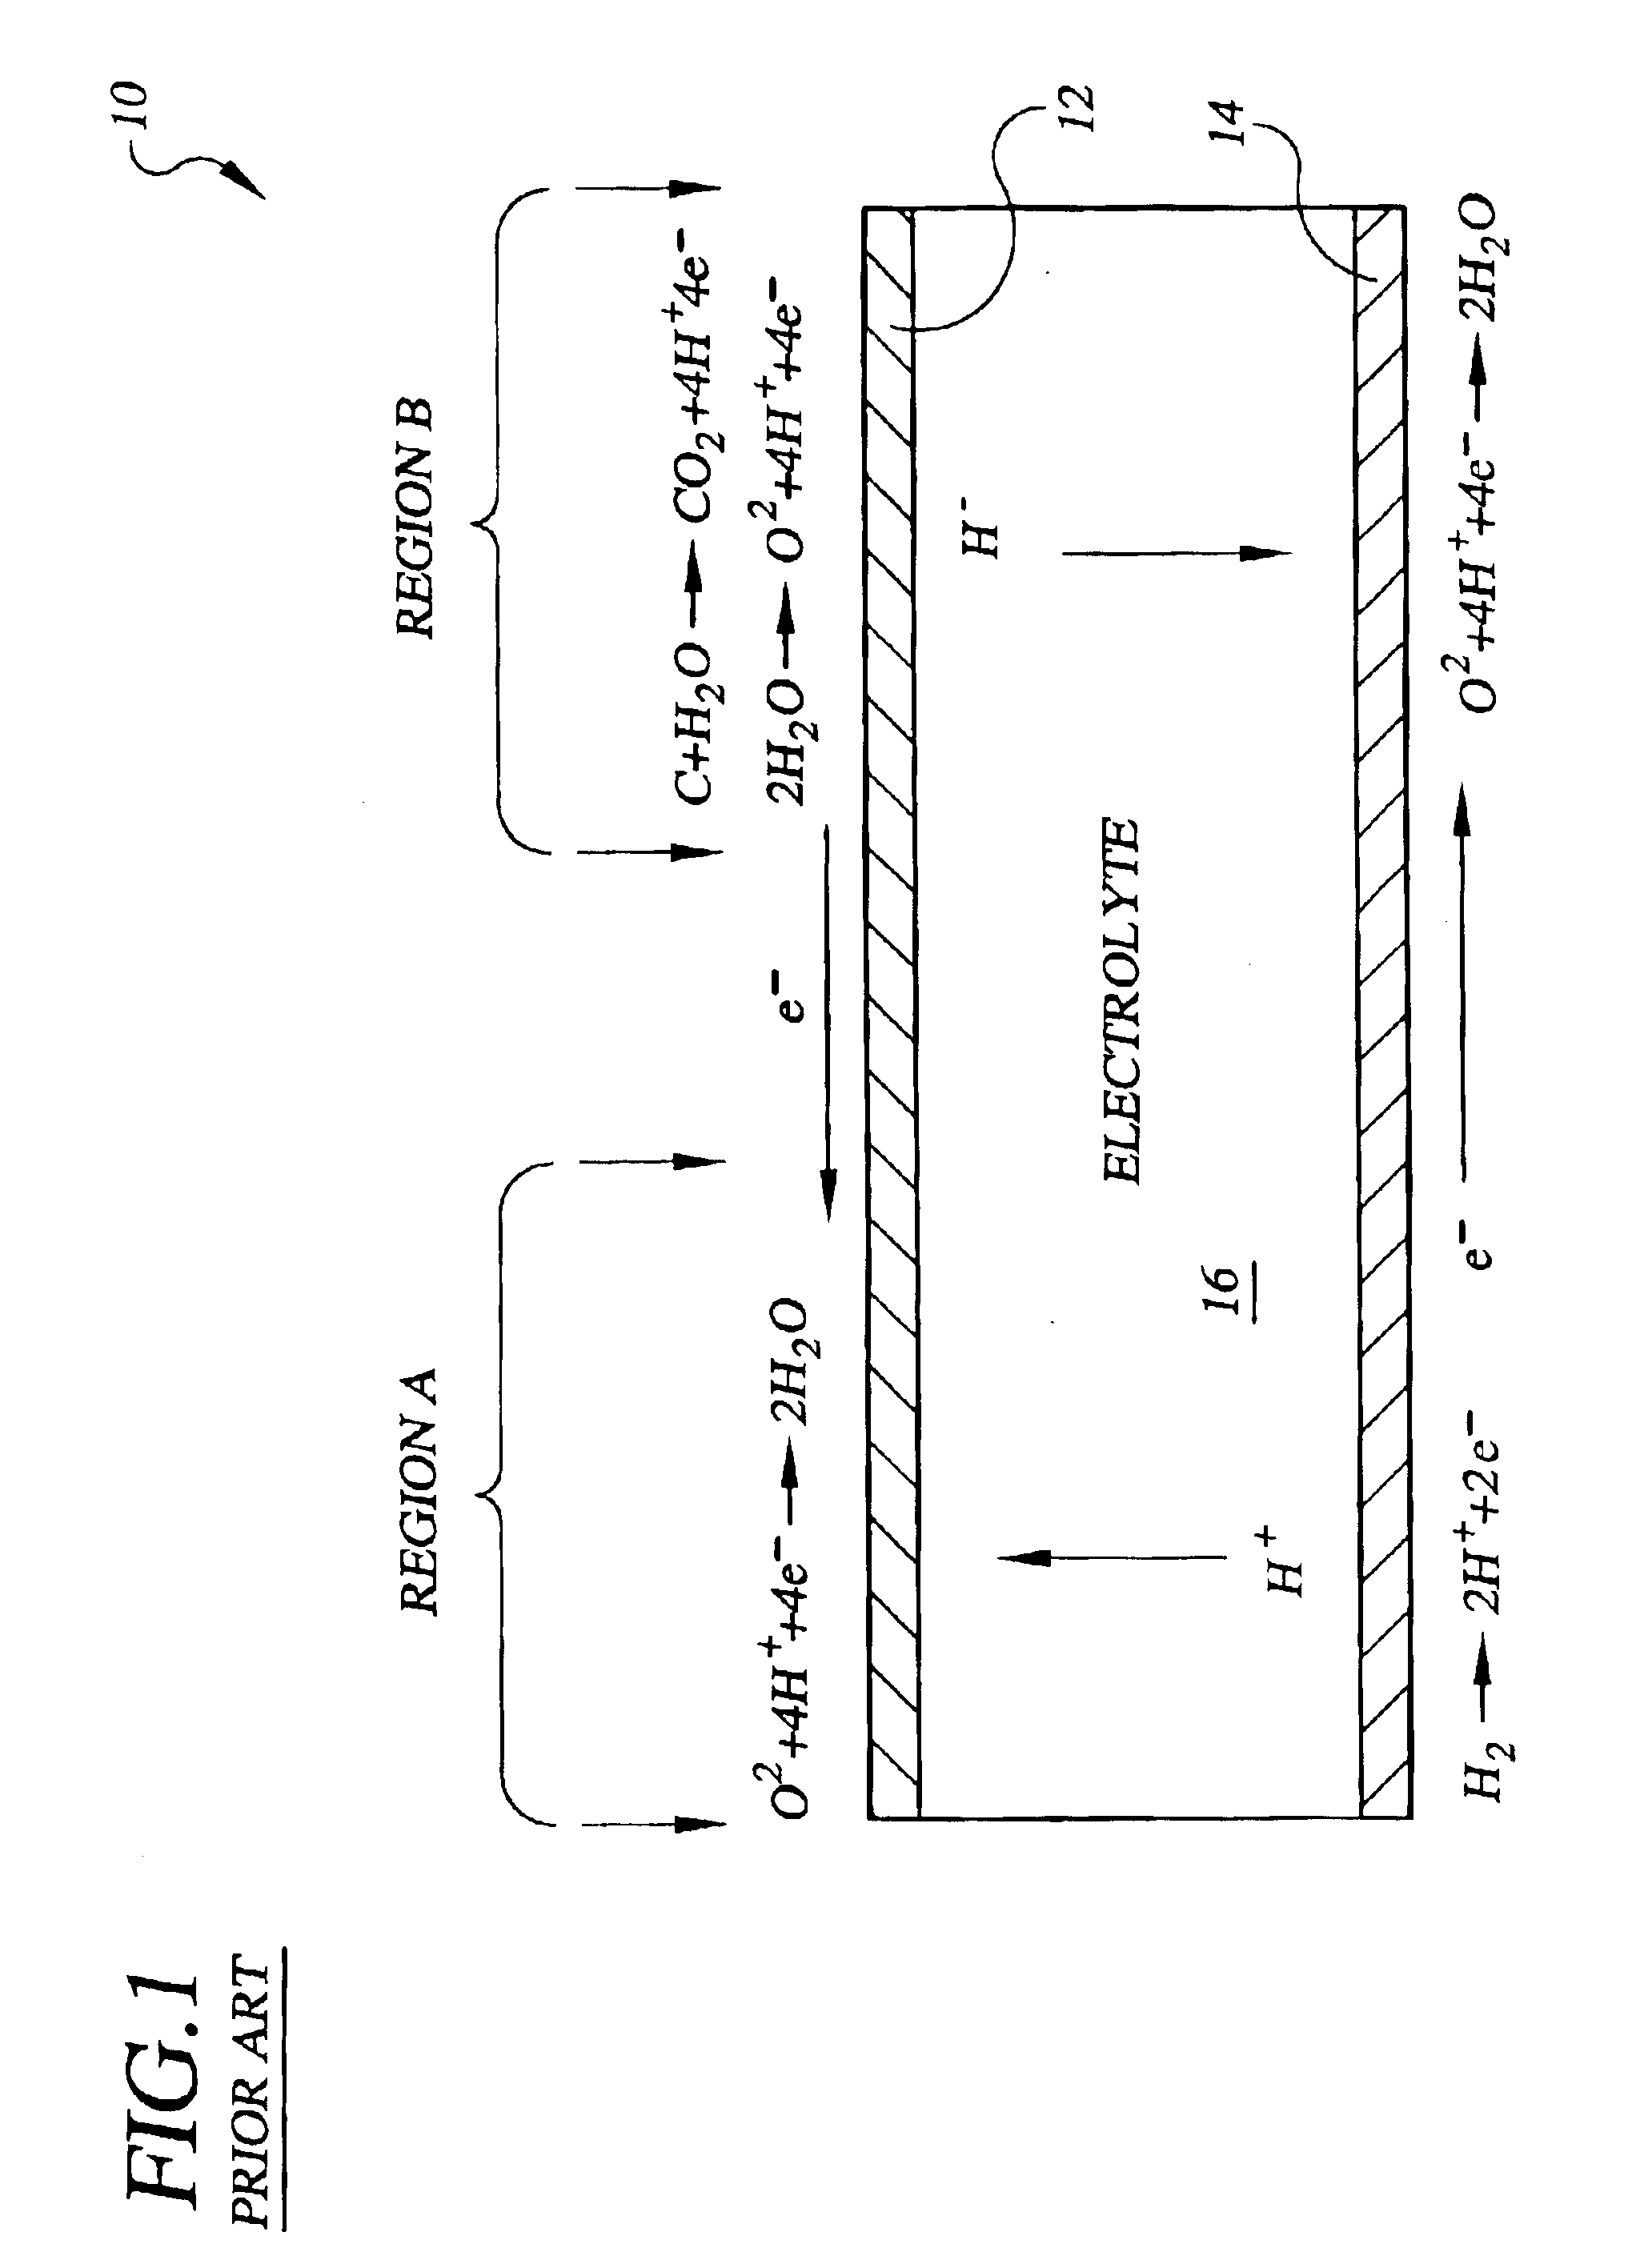 Fuel cell having a corrosion resistant and protected cathode catalyst layer